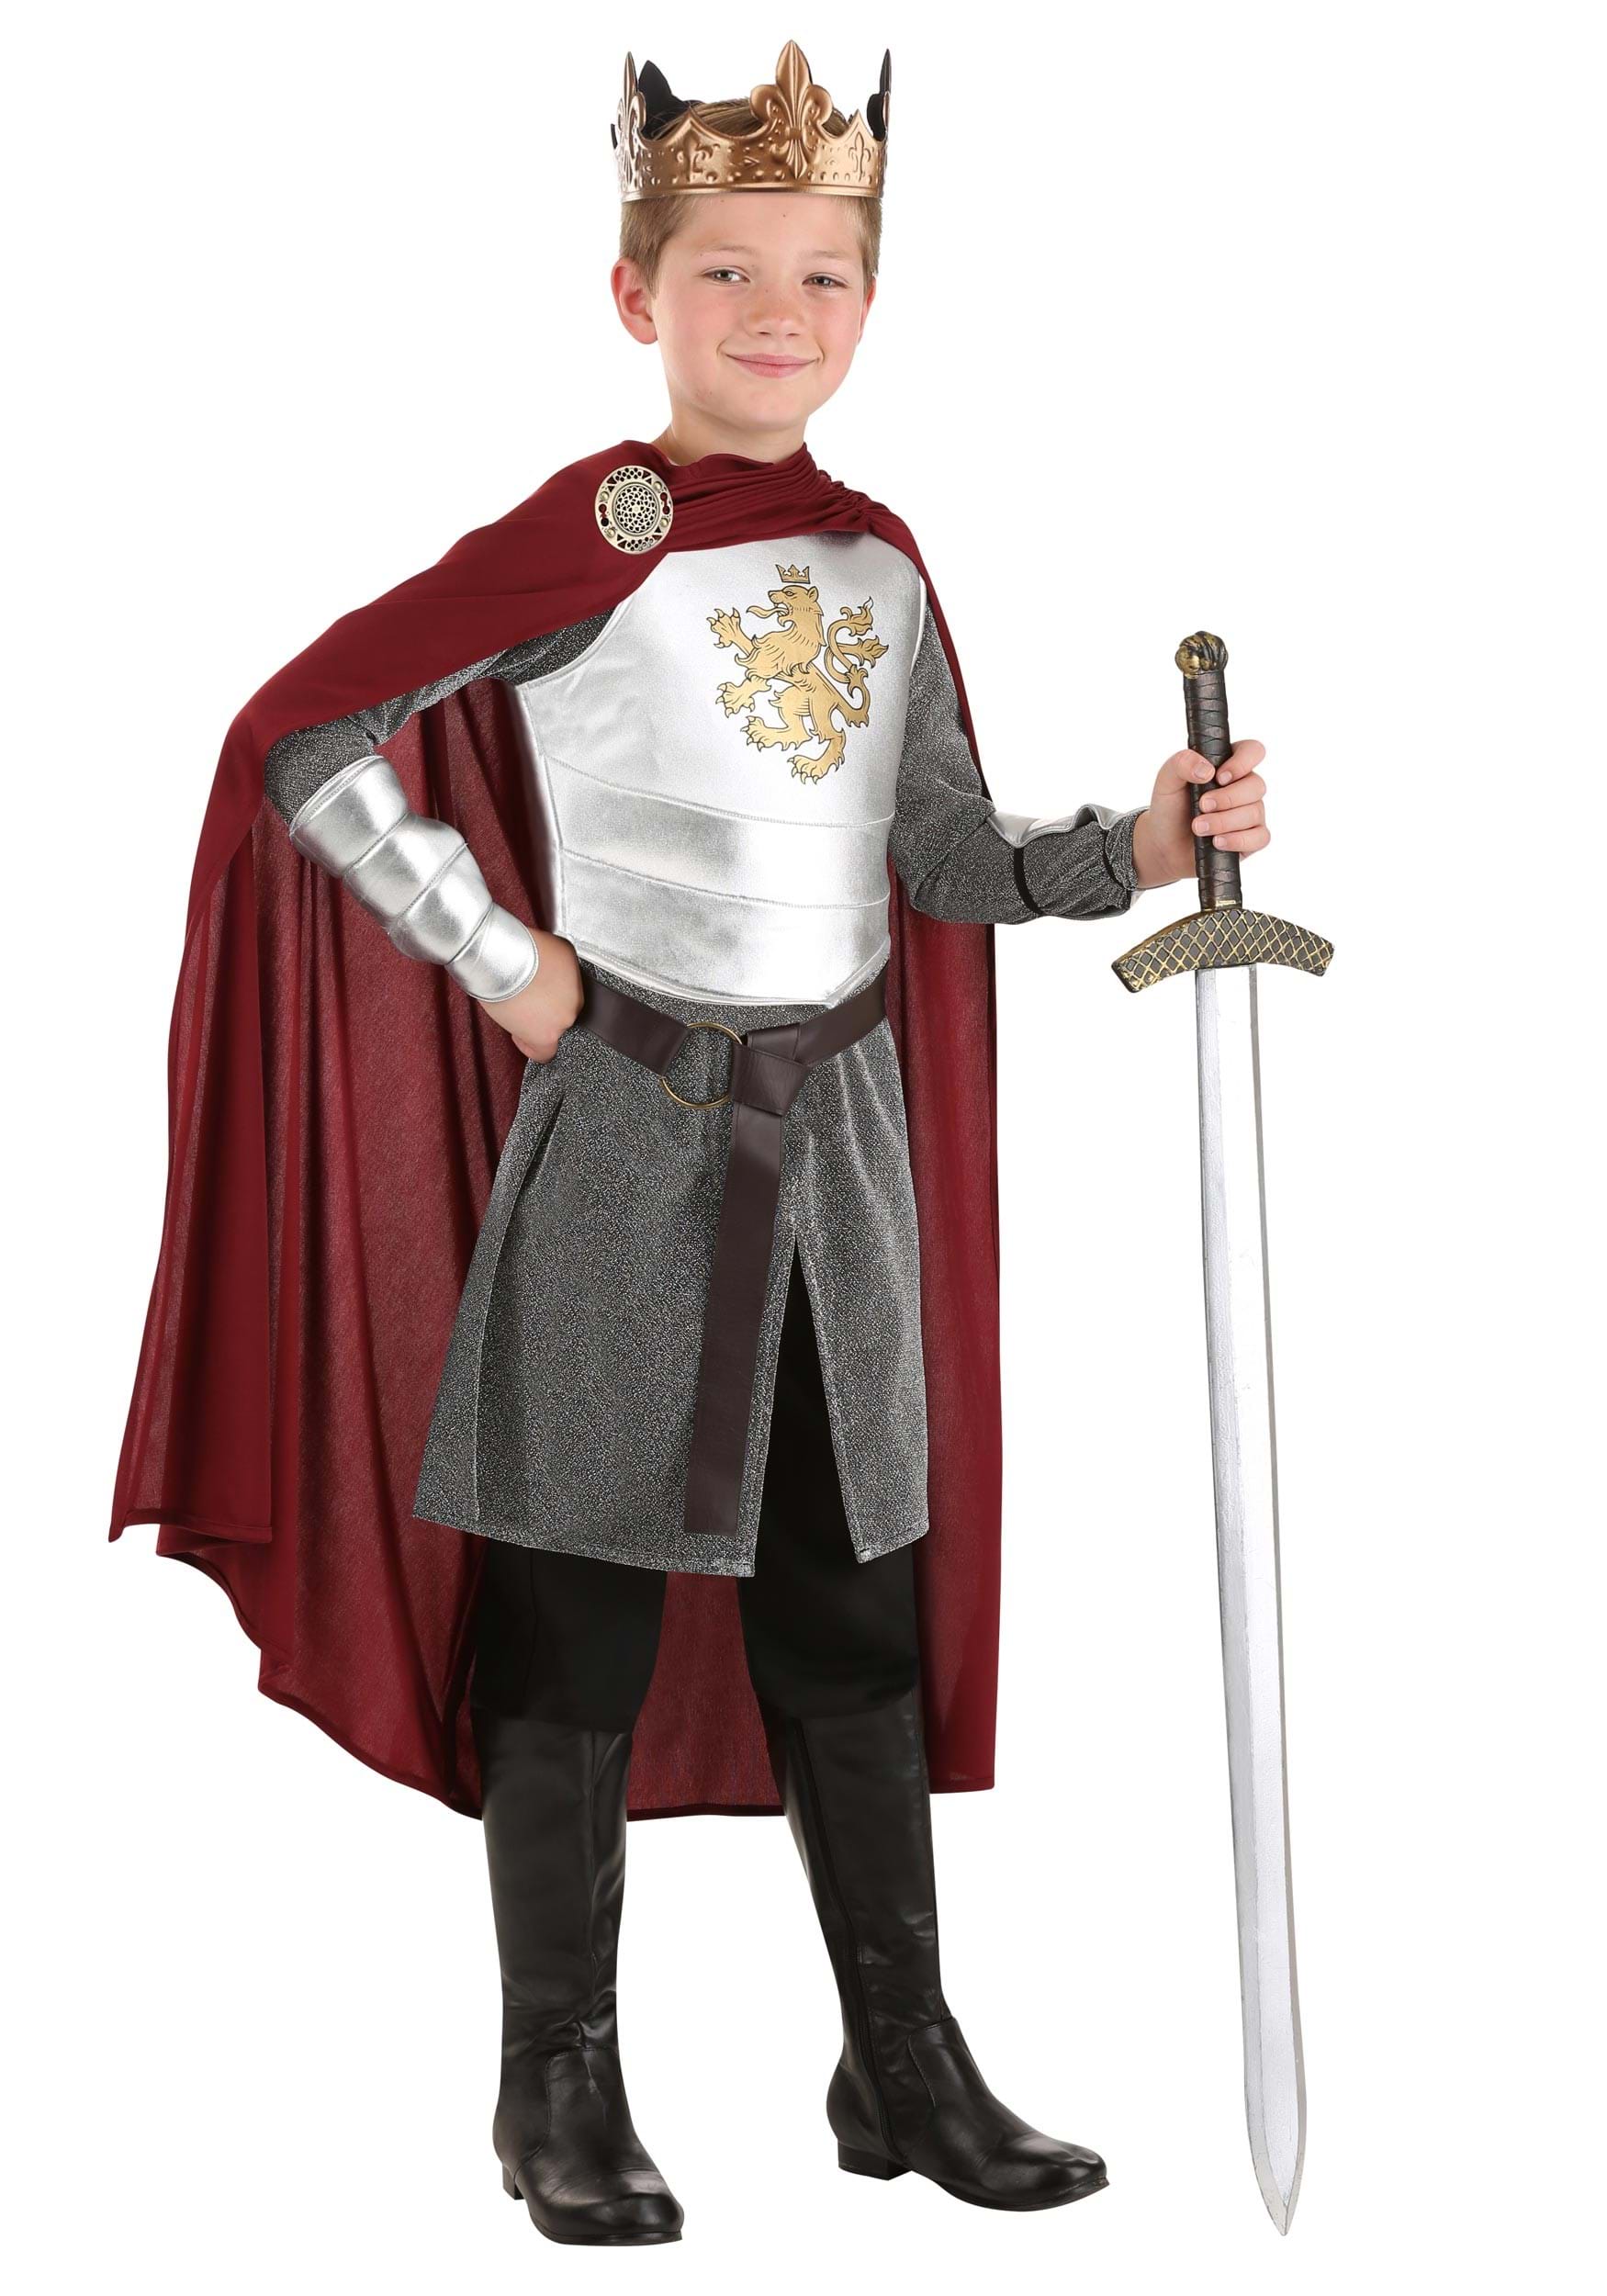 Photos - Fancy Dress Knight FUN Costumes Lionheart  Costume for Kids Red/Gray FUN1065CH 